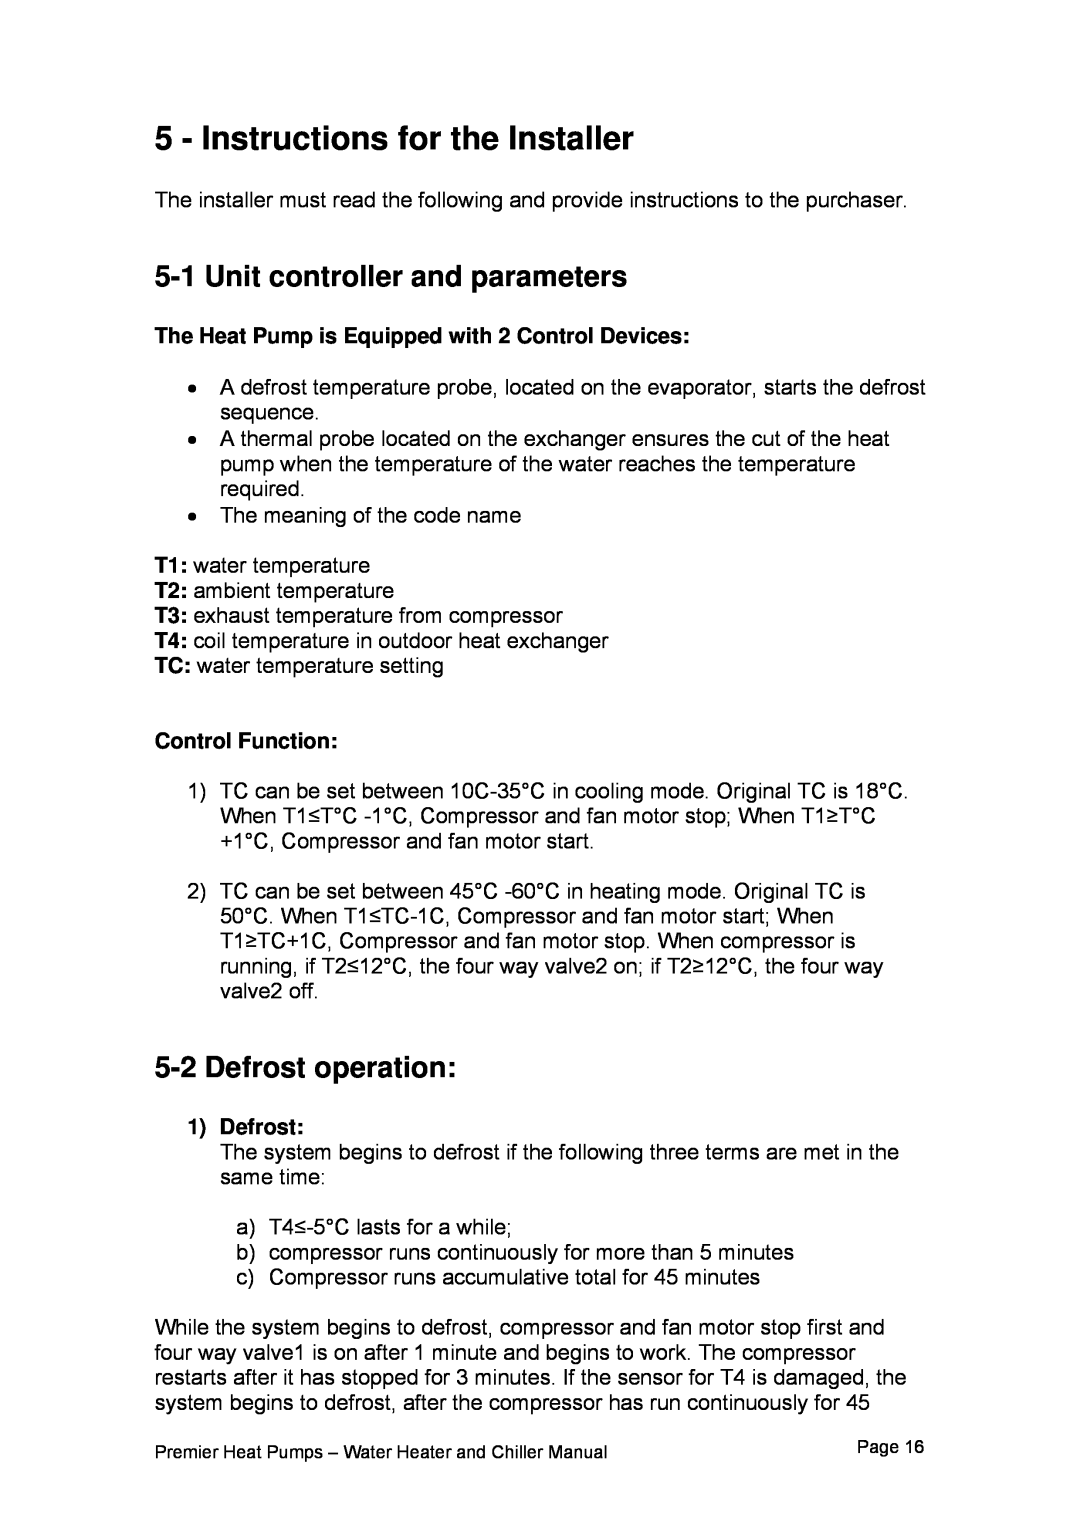 Premier PHP HWC-200 Instructions for the Installer, 5-1Unit controller and parameters, 5-2Defrost operation, 1Defrost 